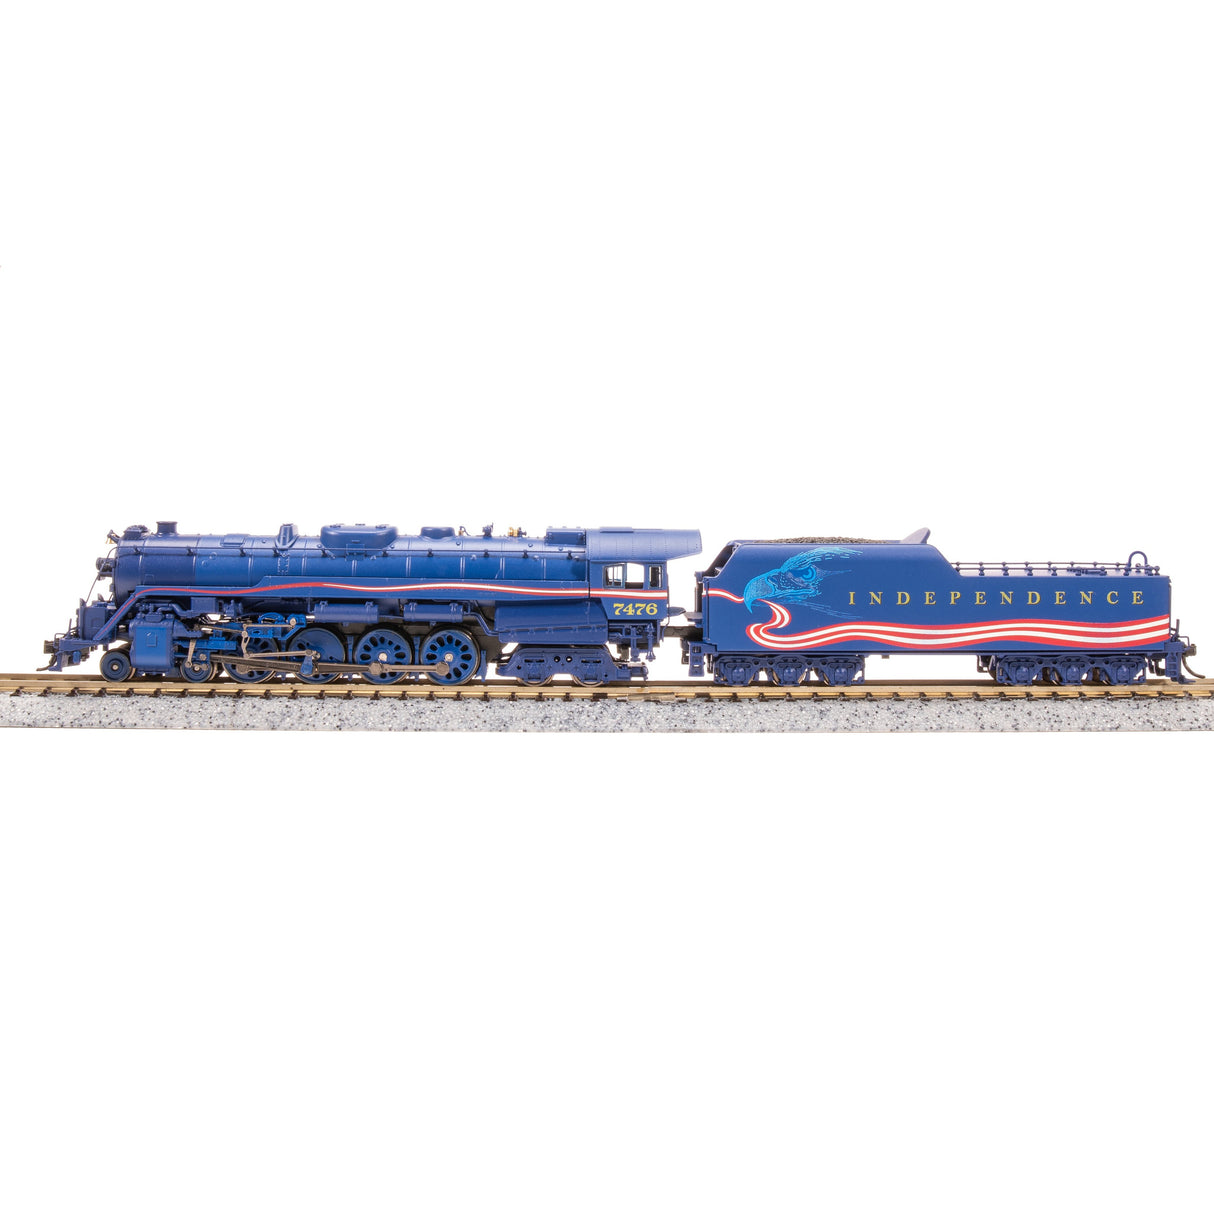 Broadway Limited N Scale Reading T-1 4-8-4 Steam Locomotive Independece Day #7476 DC/DCC S